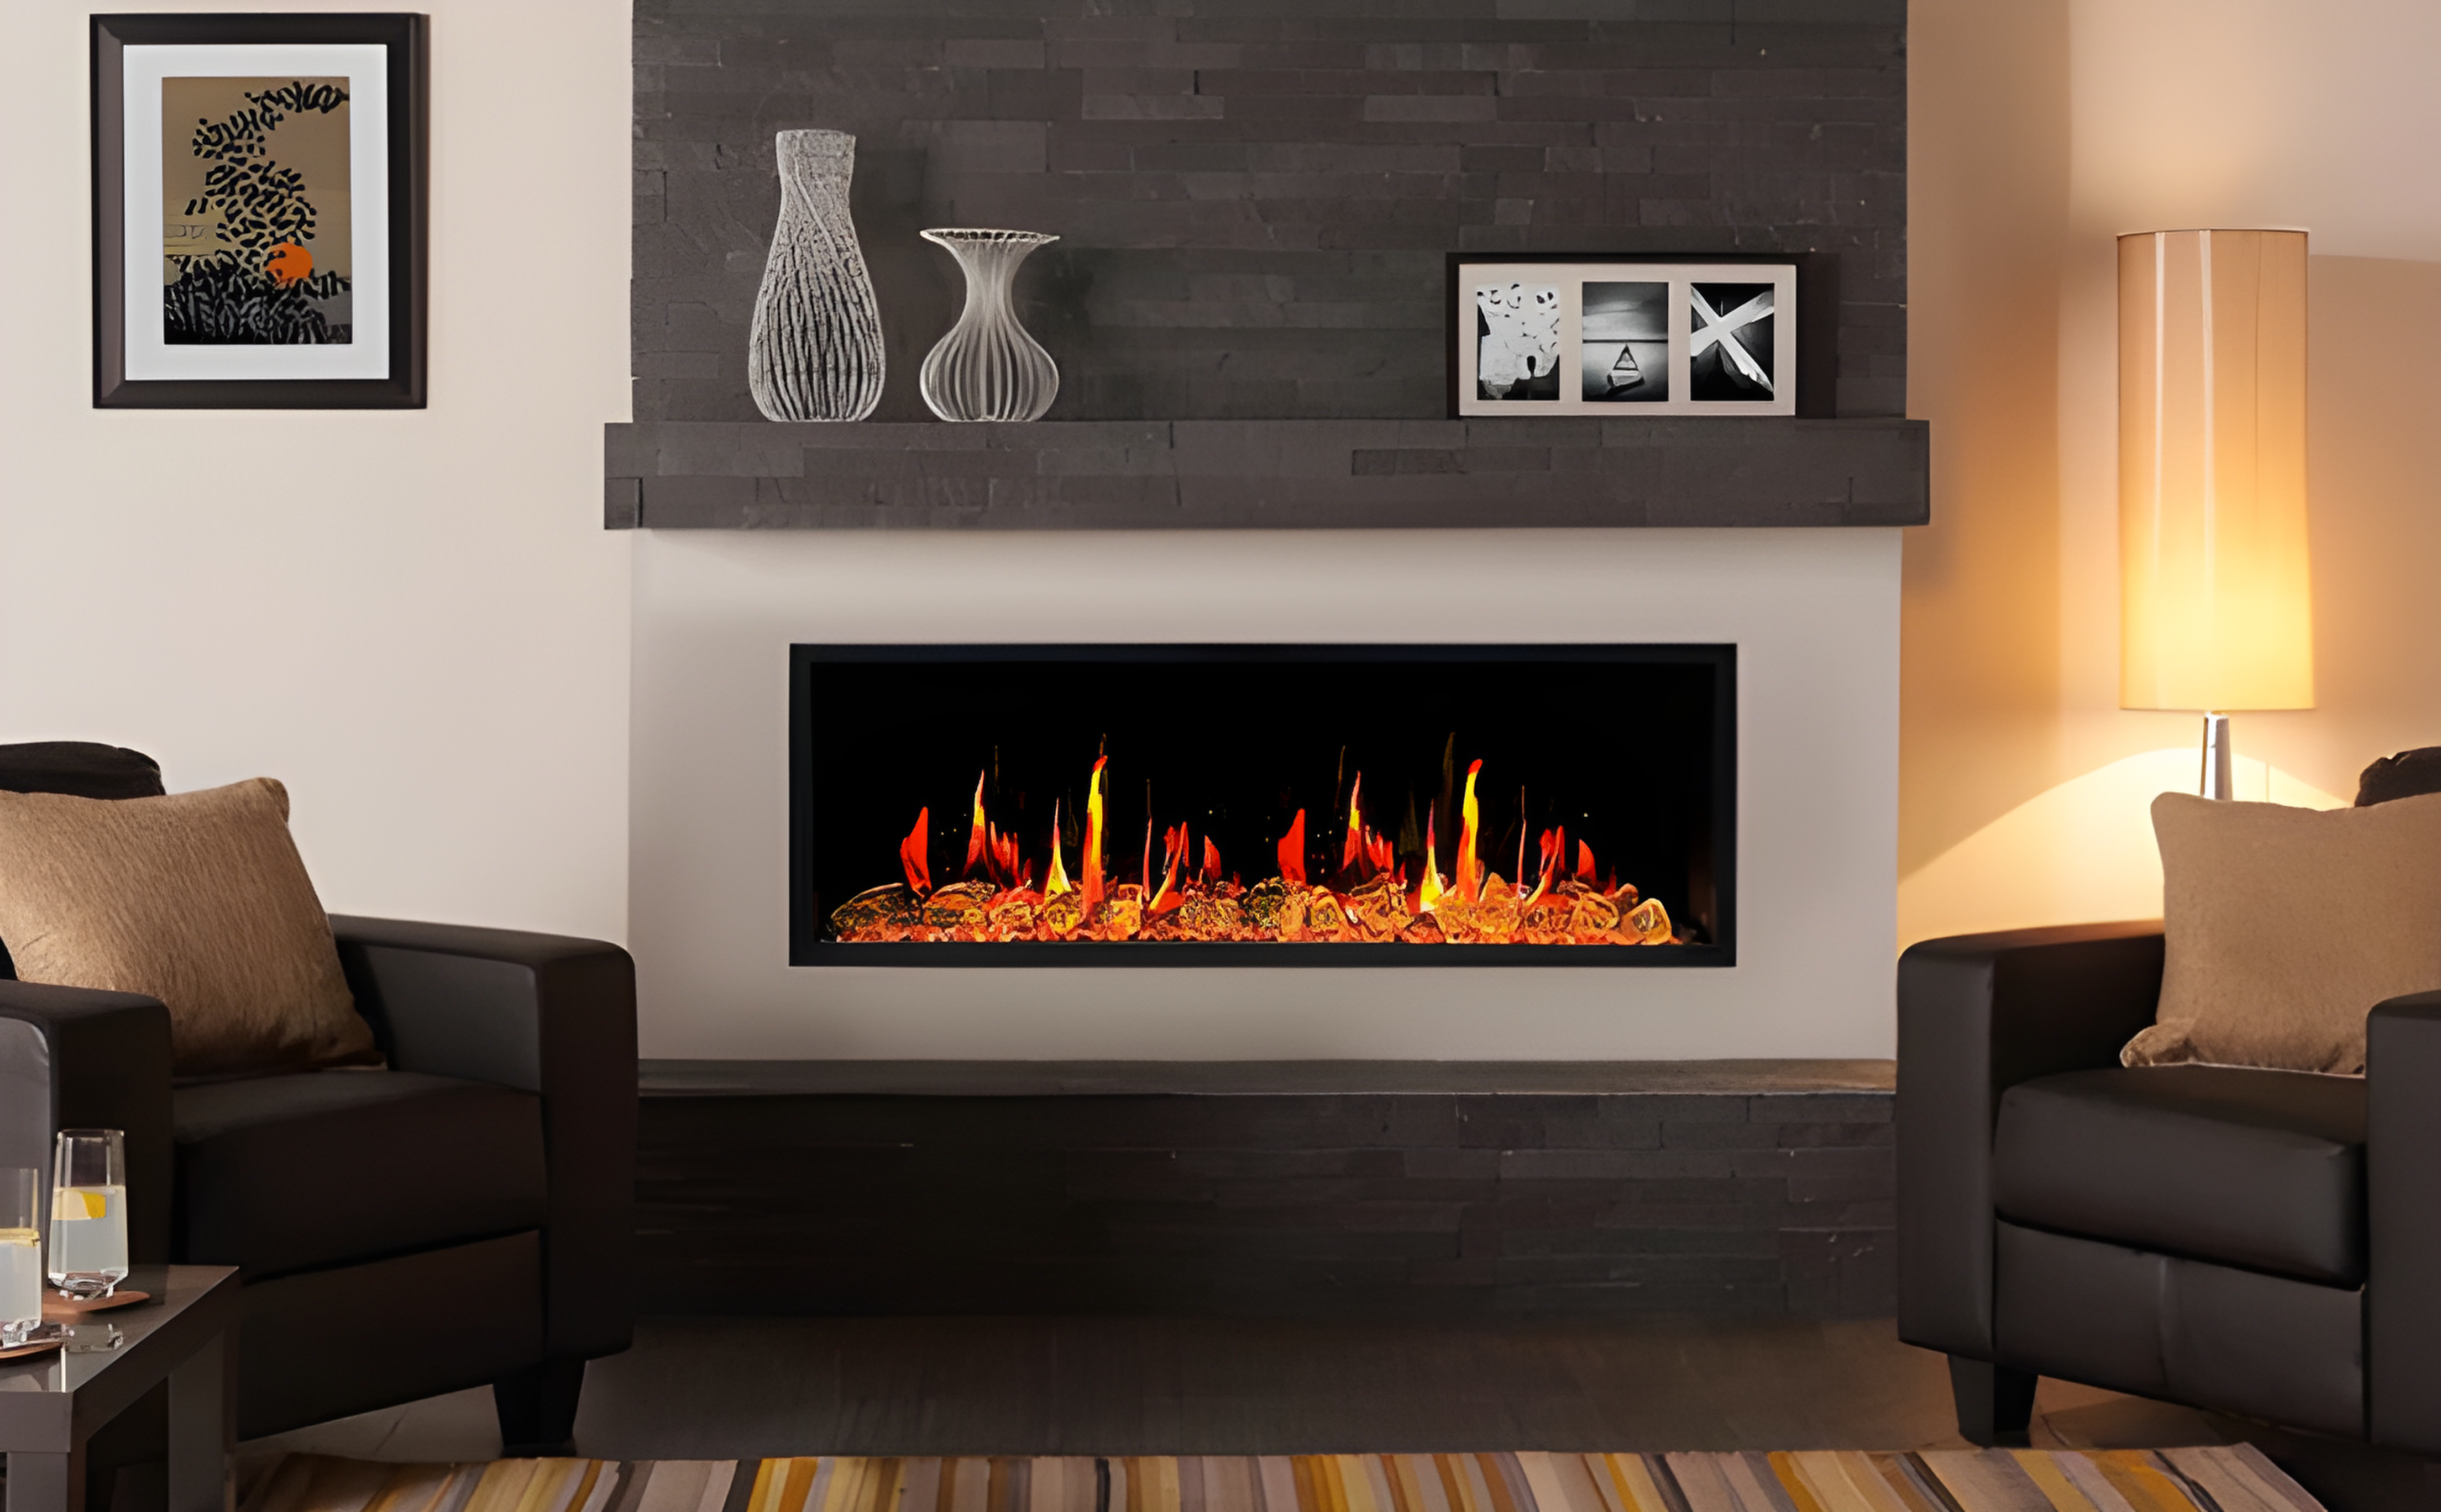 Litedeer Latitude 45 Ultra Slim WiFi Enabled Vent-Free Built-In Electric Fireplace With Reflective Fire Glass